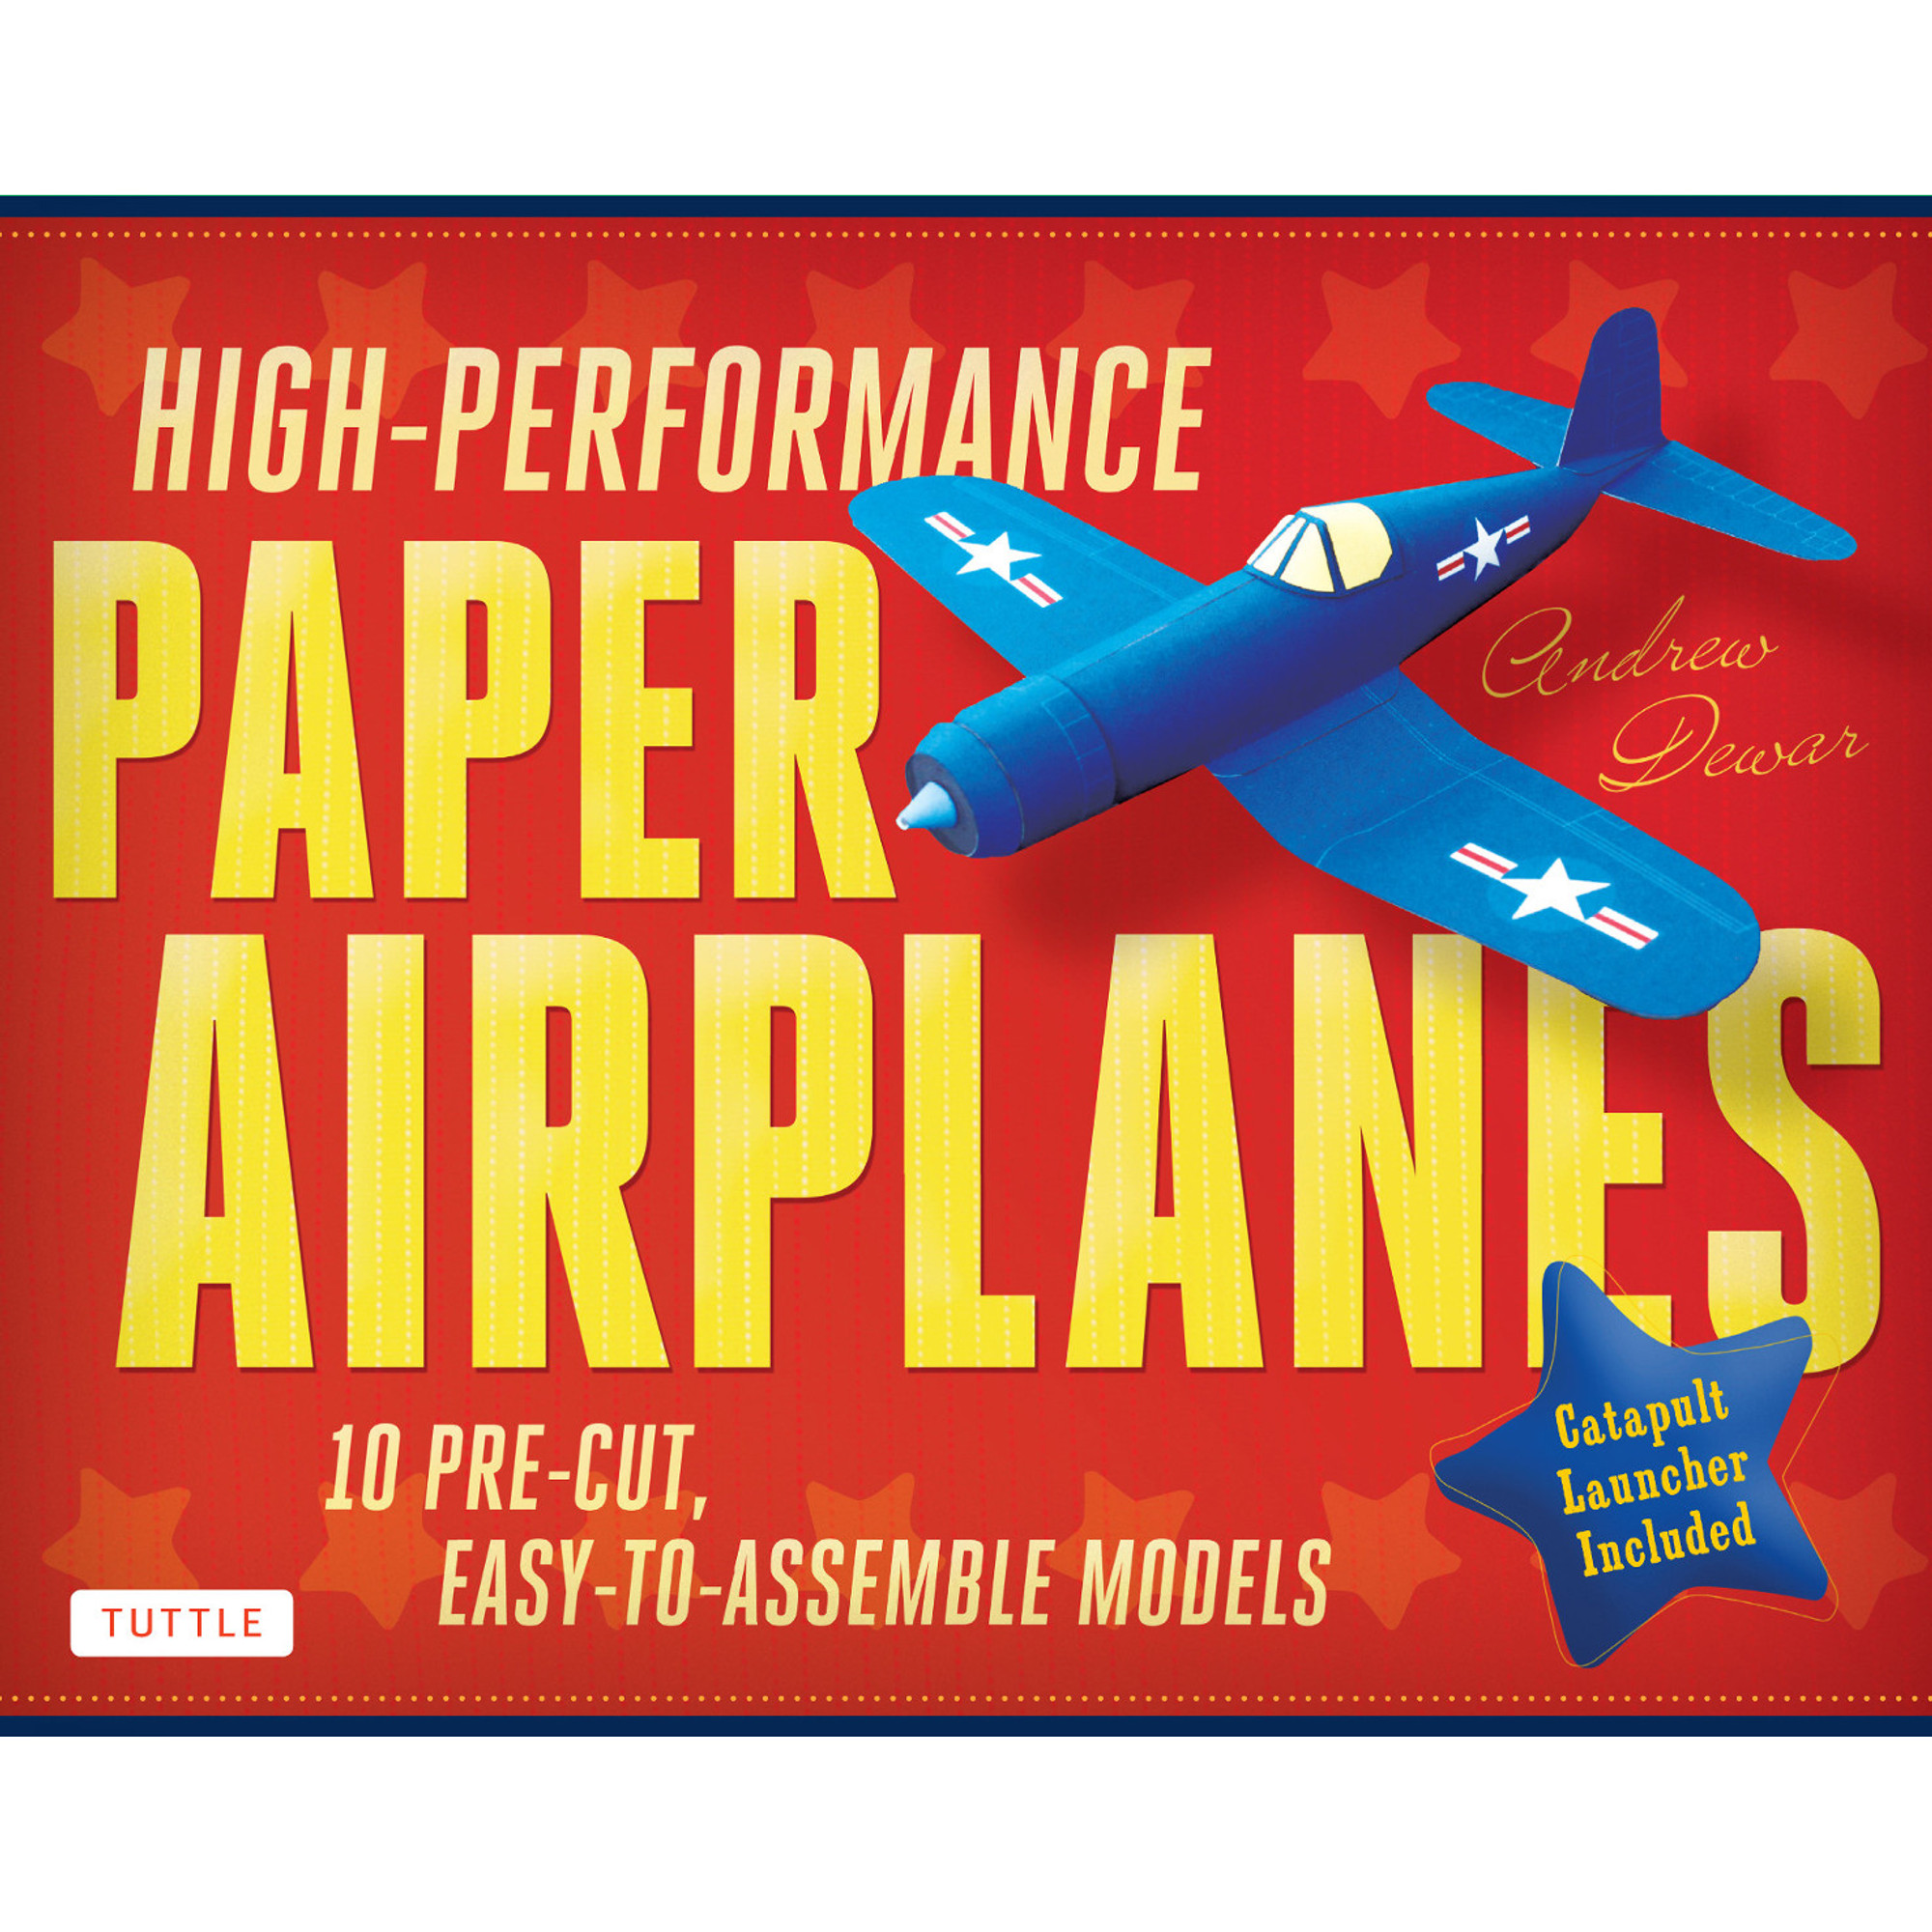 Simple Origami Airplanes Mini Kit by Andrew Dewar